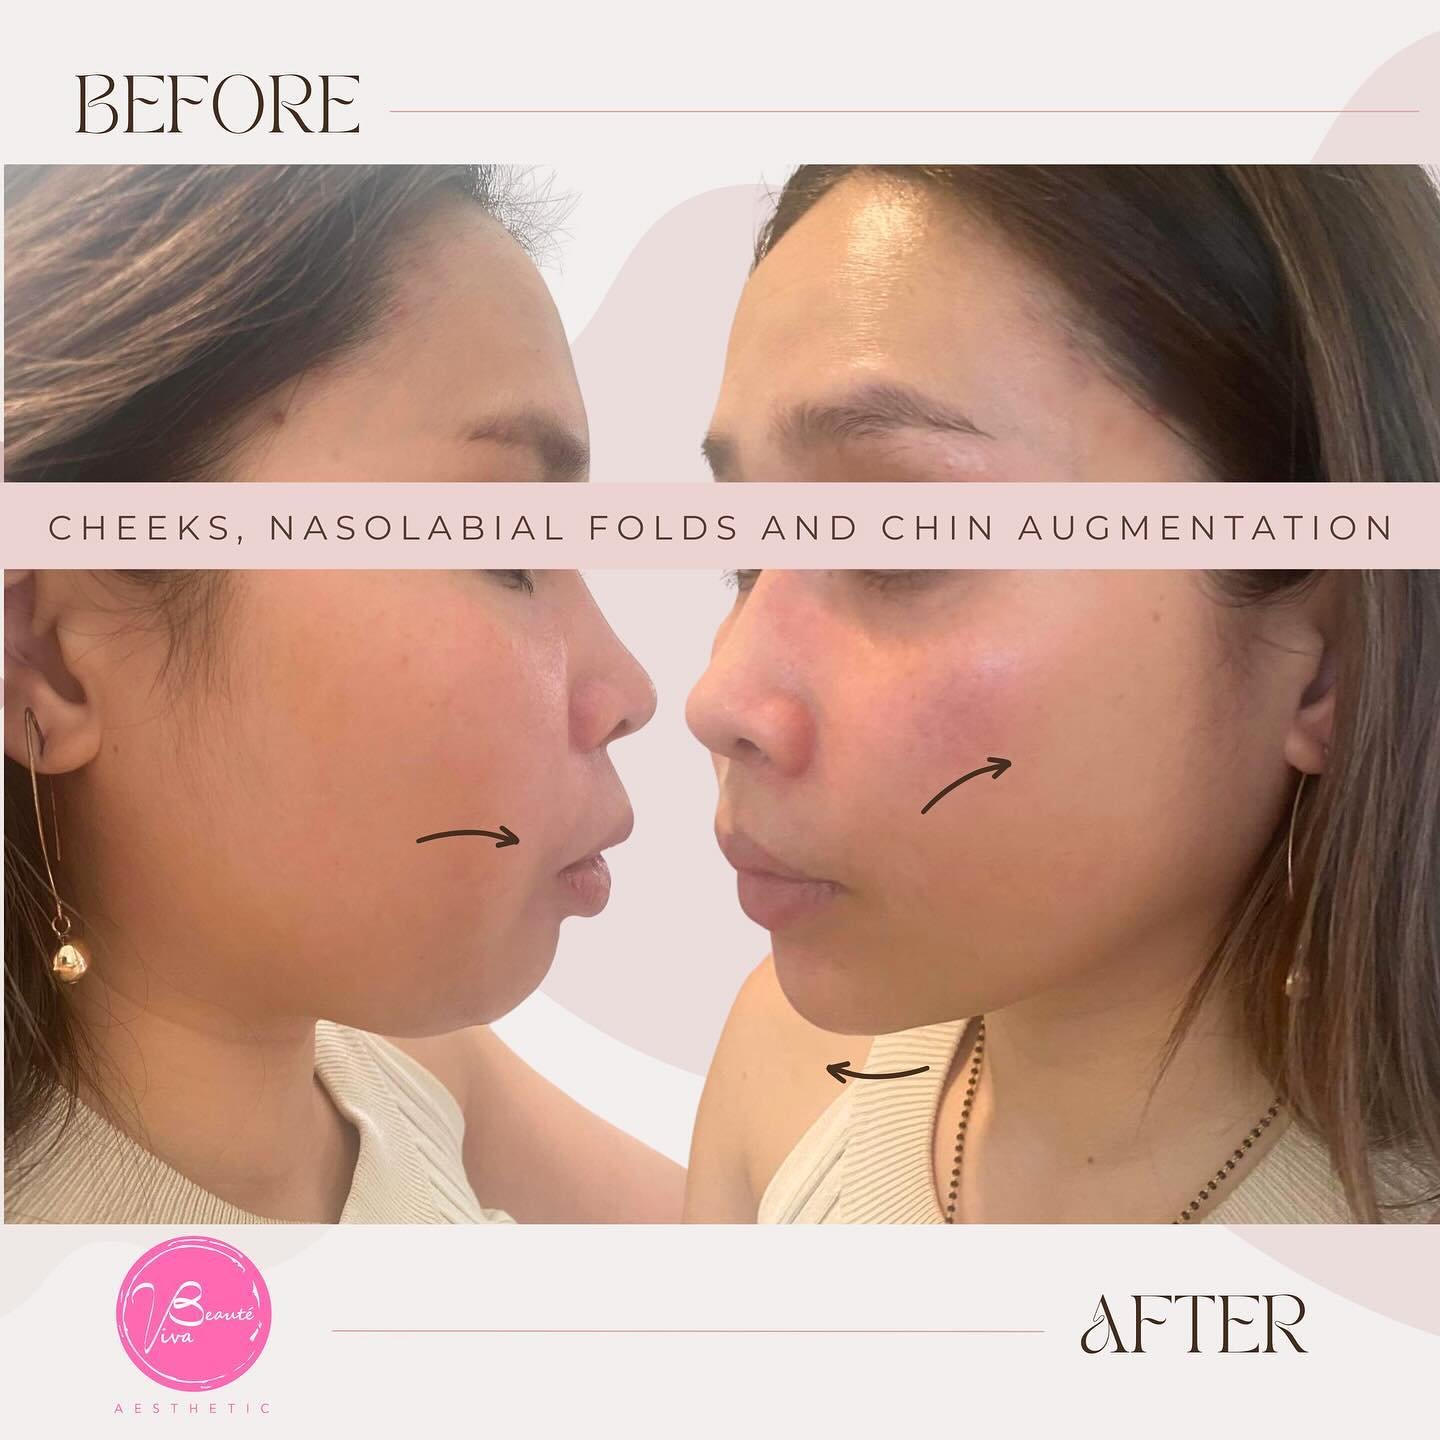 🌟 Transformation Alert! 🌟
Swipe left to see her incredible Before and After photos! 👈🏼

Our lovely client, who felt self-conscious about her rounded, chubby &ldquo;baby face,&rdquo; sought a more defined look. With our V-lift Technique, we sculpt